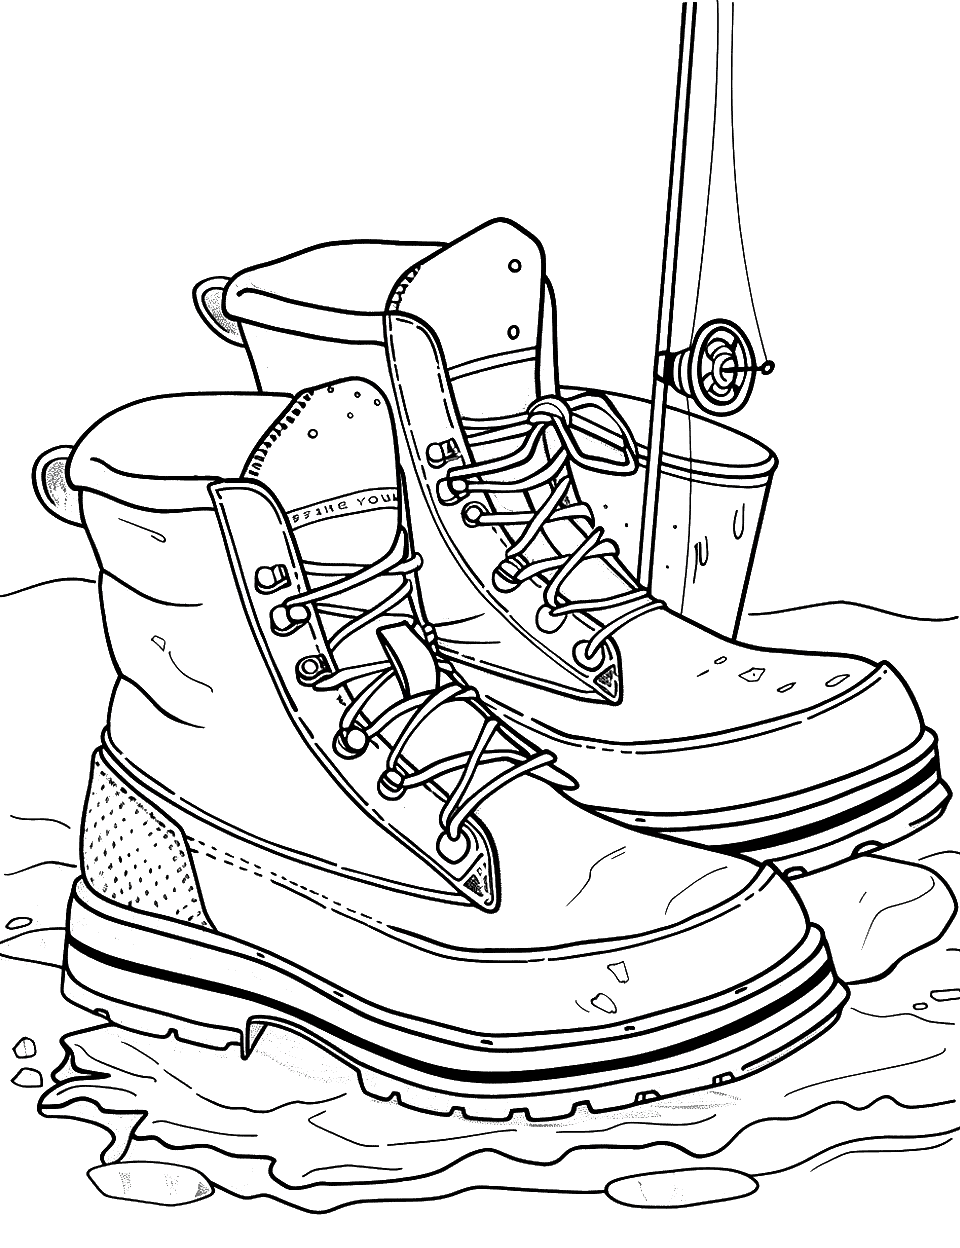 Ice Fishing Boots by a Frozen Lake Shoe Coloring Page - Insulated boots with a fishing rod and a bucket on the ice.